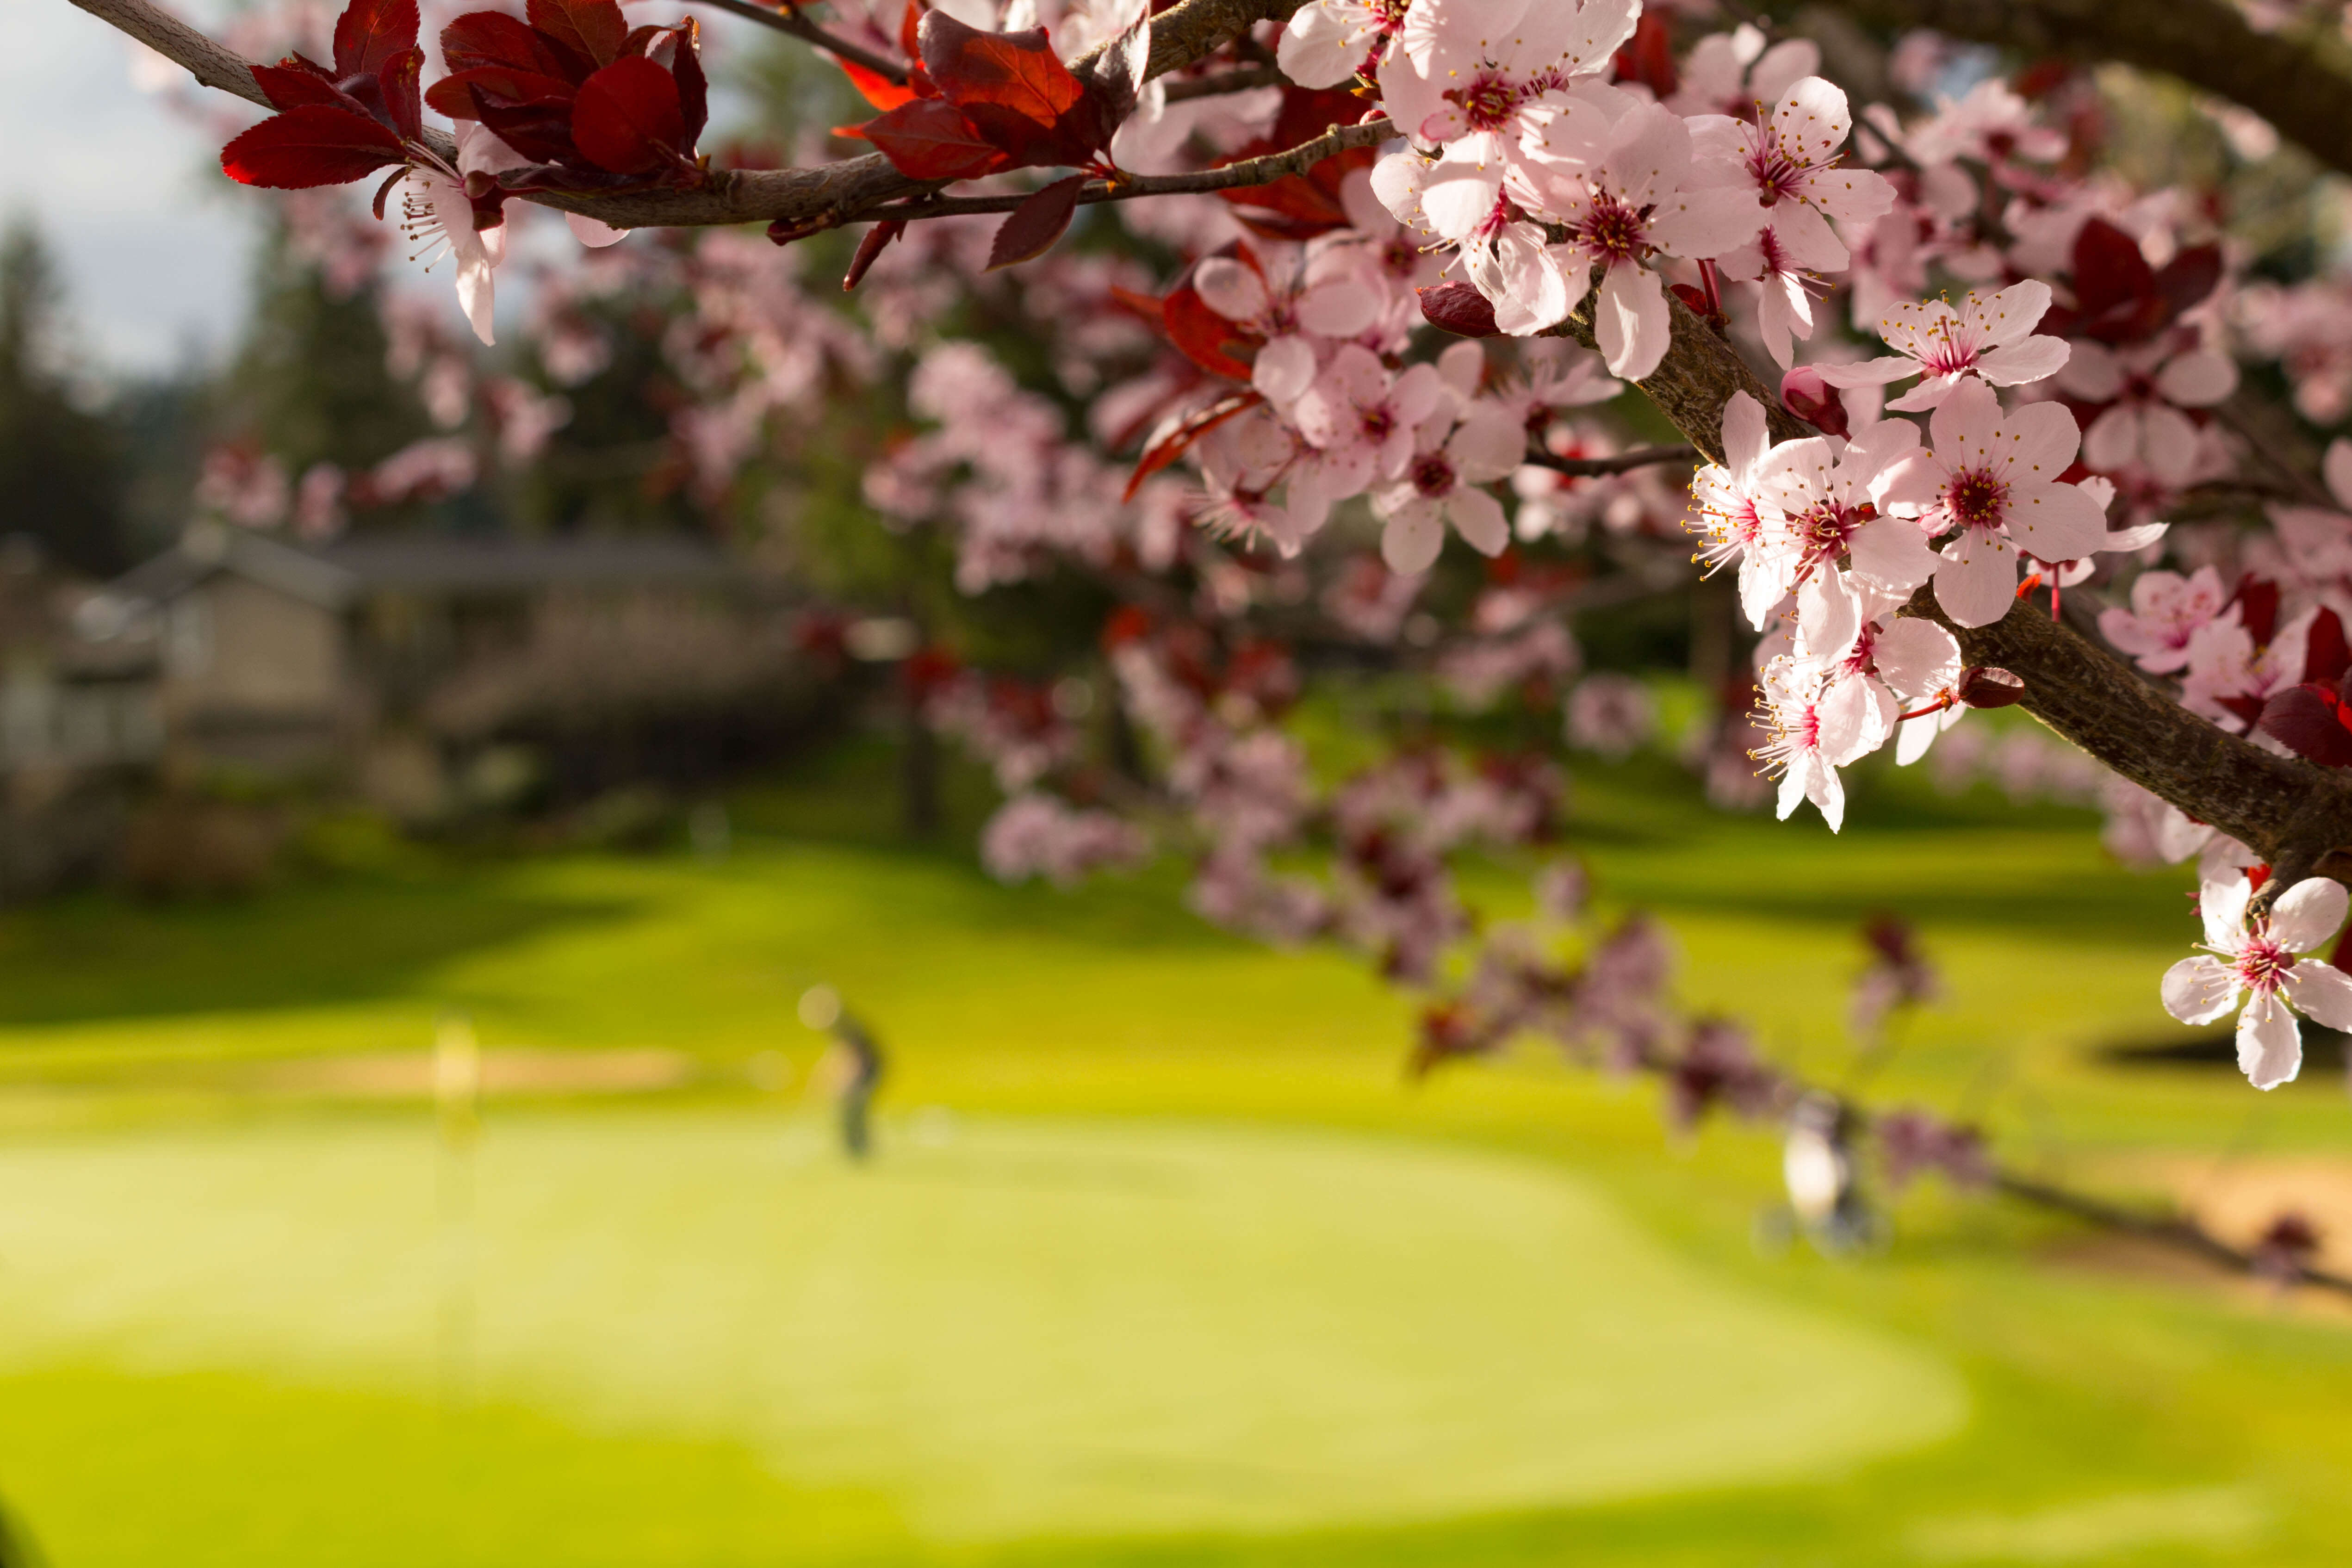 A close up of pink flowers on a tree, a man in golfing in the background.